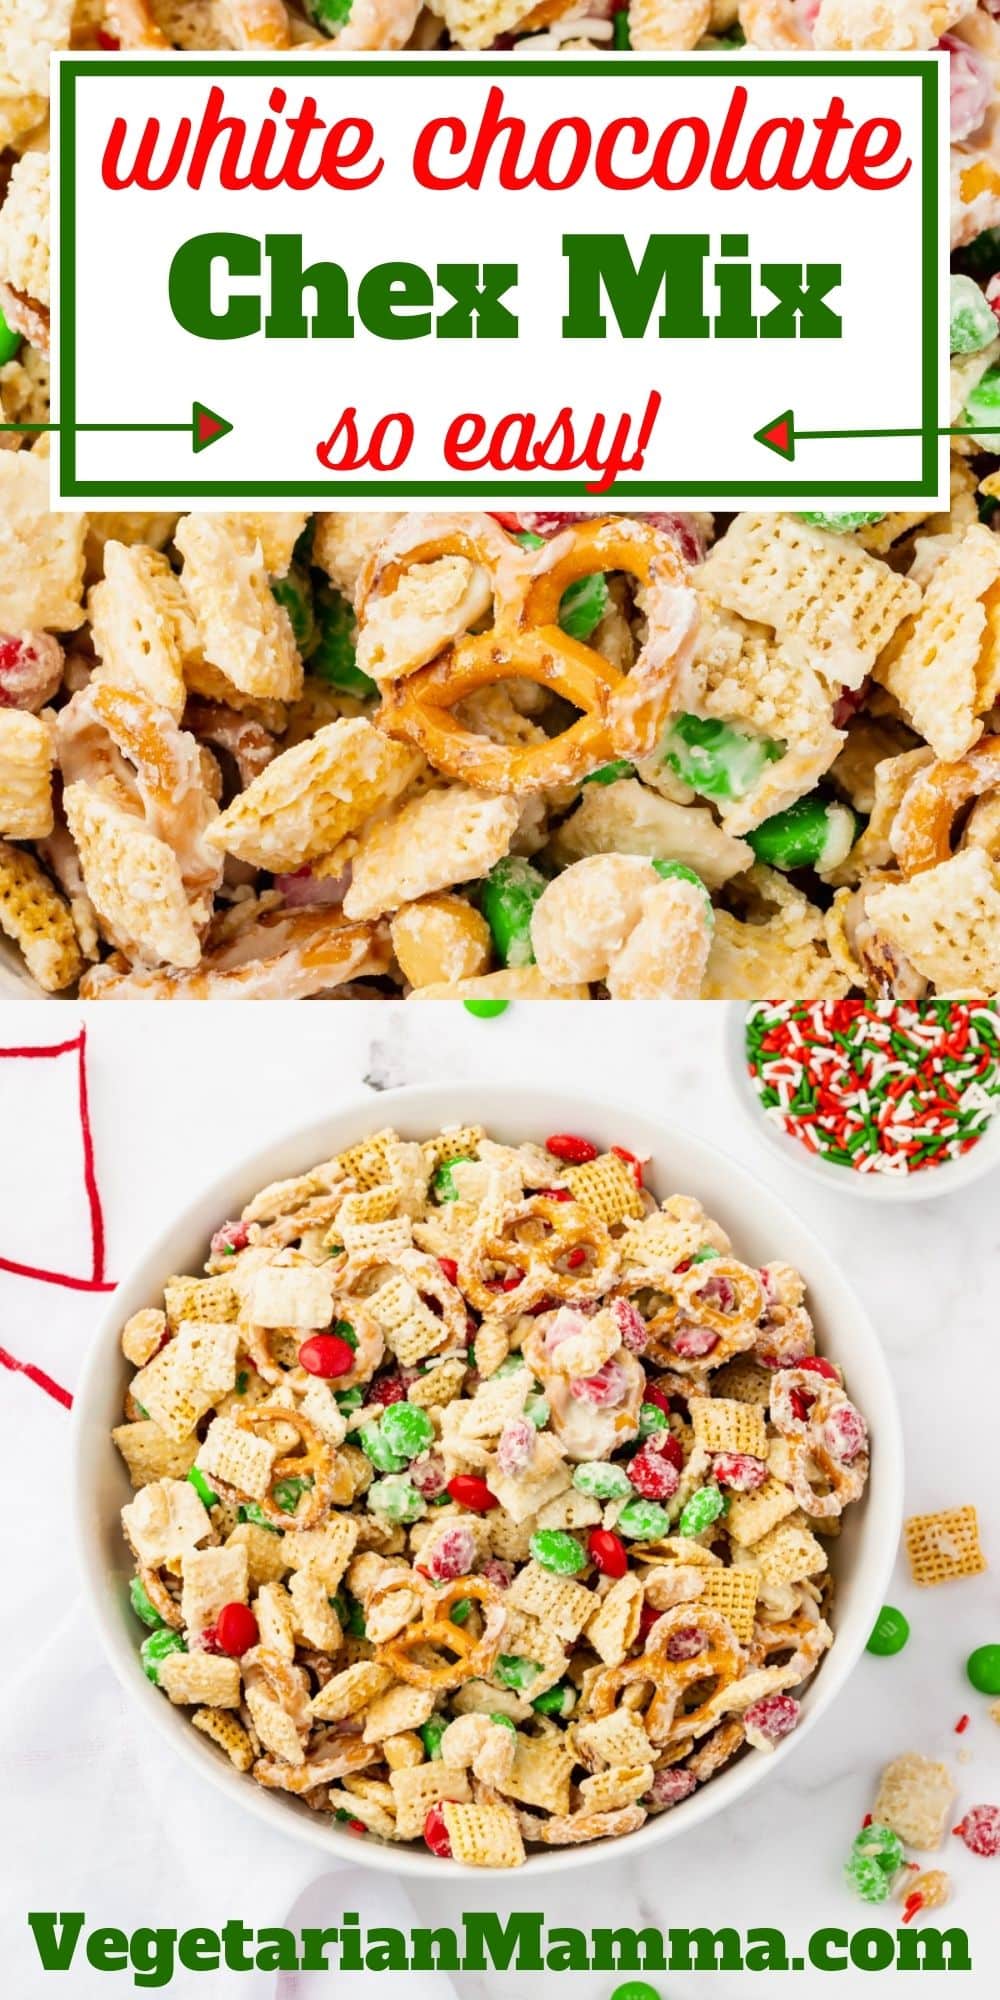 White Chocolate Chex Mix is an irresistibly delicious holiday treat made with crunchy cereal, pretzels, peanuts, and red and green M&Ms. It's sweet, salty, and super easy to make!